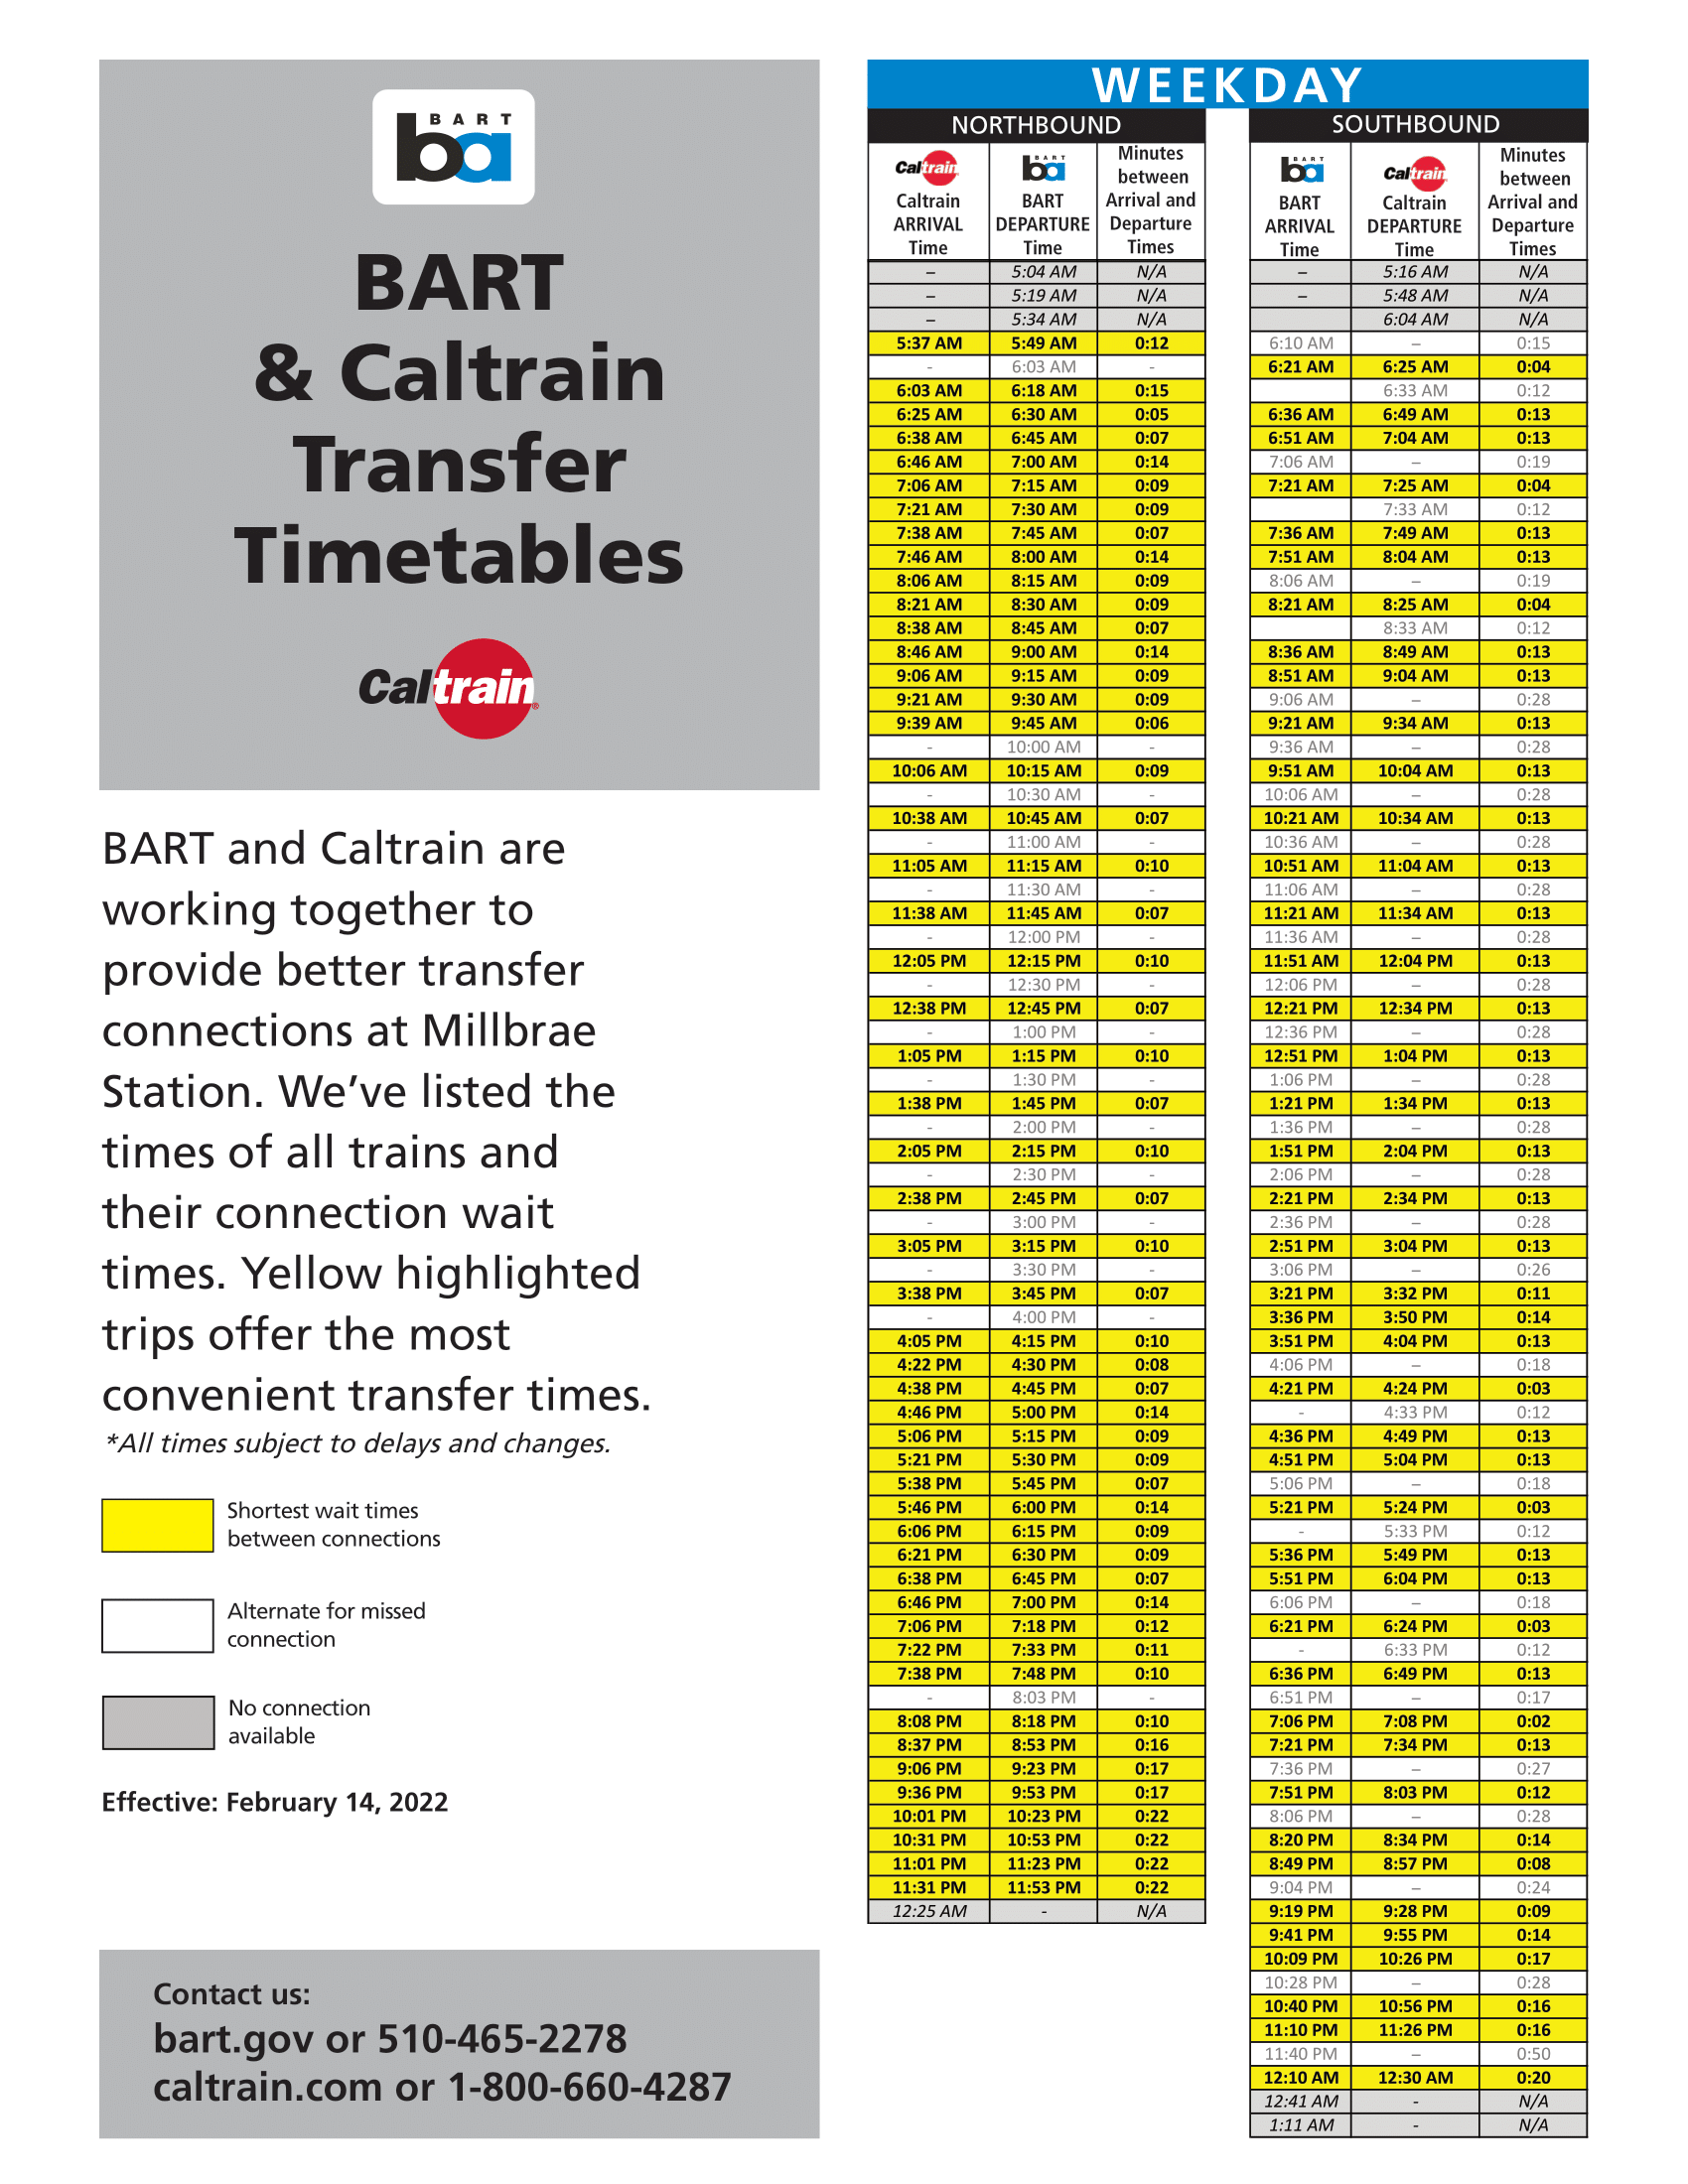 Weekday BART and Caltrain transfer times reflecting February 14, 2022 schedule change